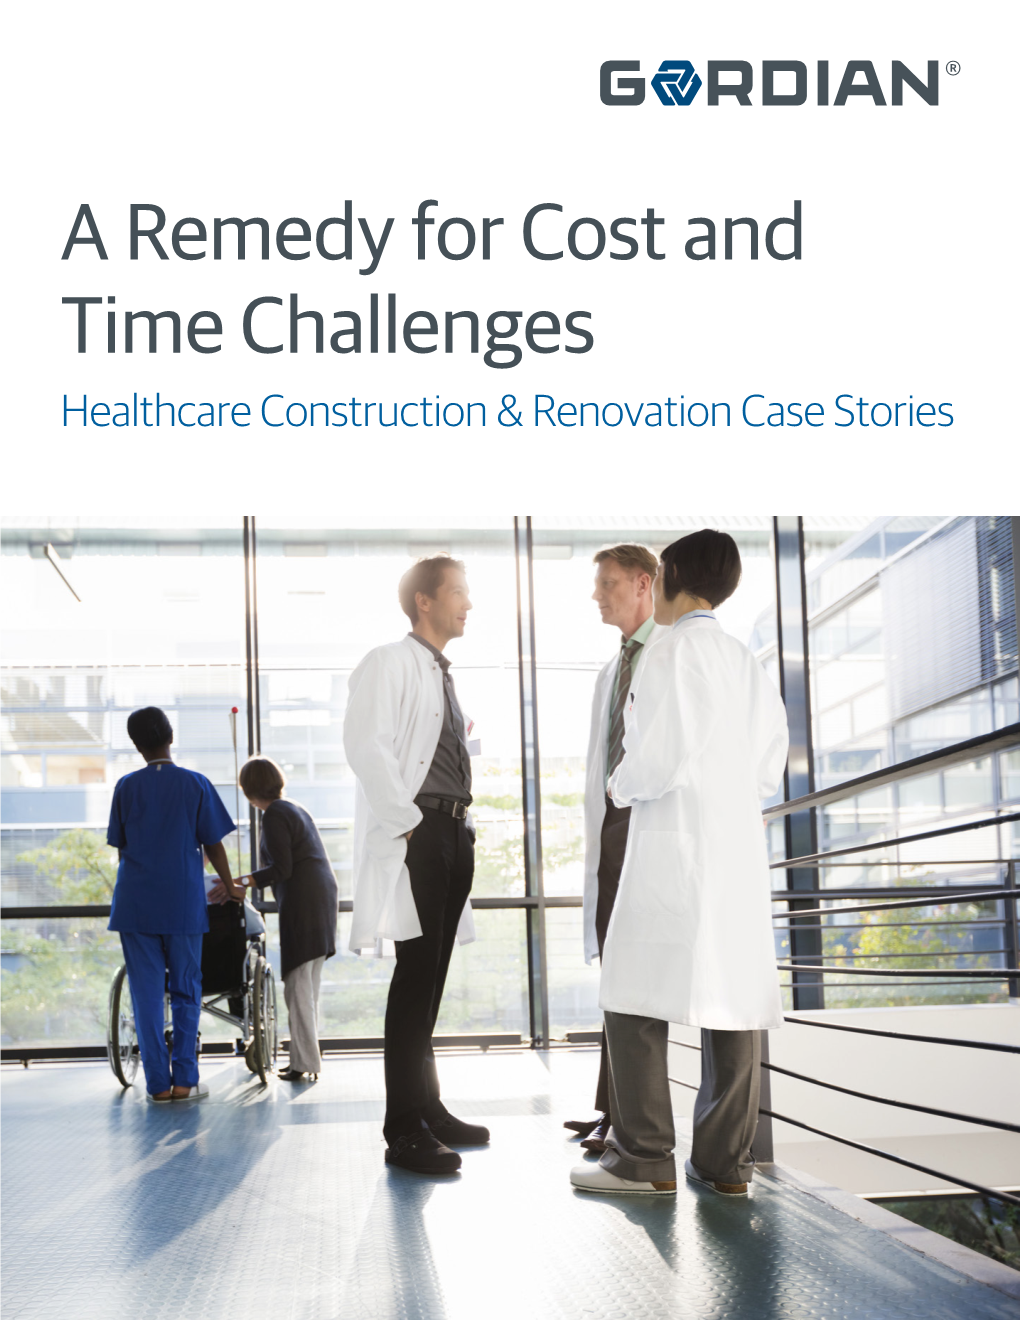 A Remedy for Cost and Time Challenges Healthcare Construction & Renovation Case Stories a Remedy for Cost & Time Challenges